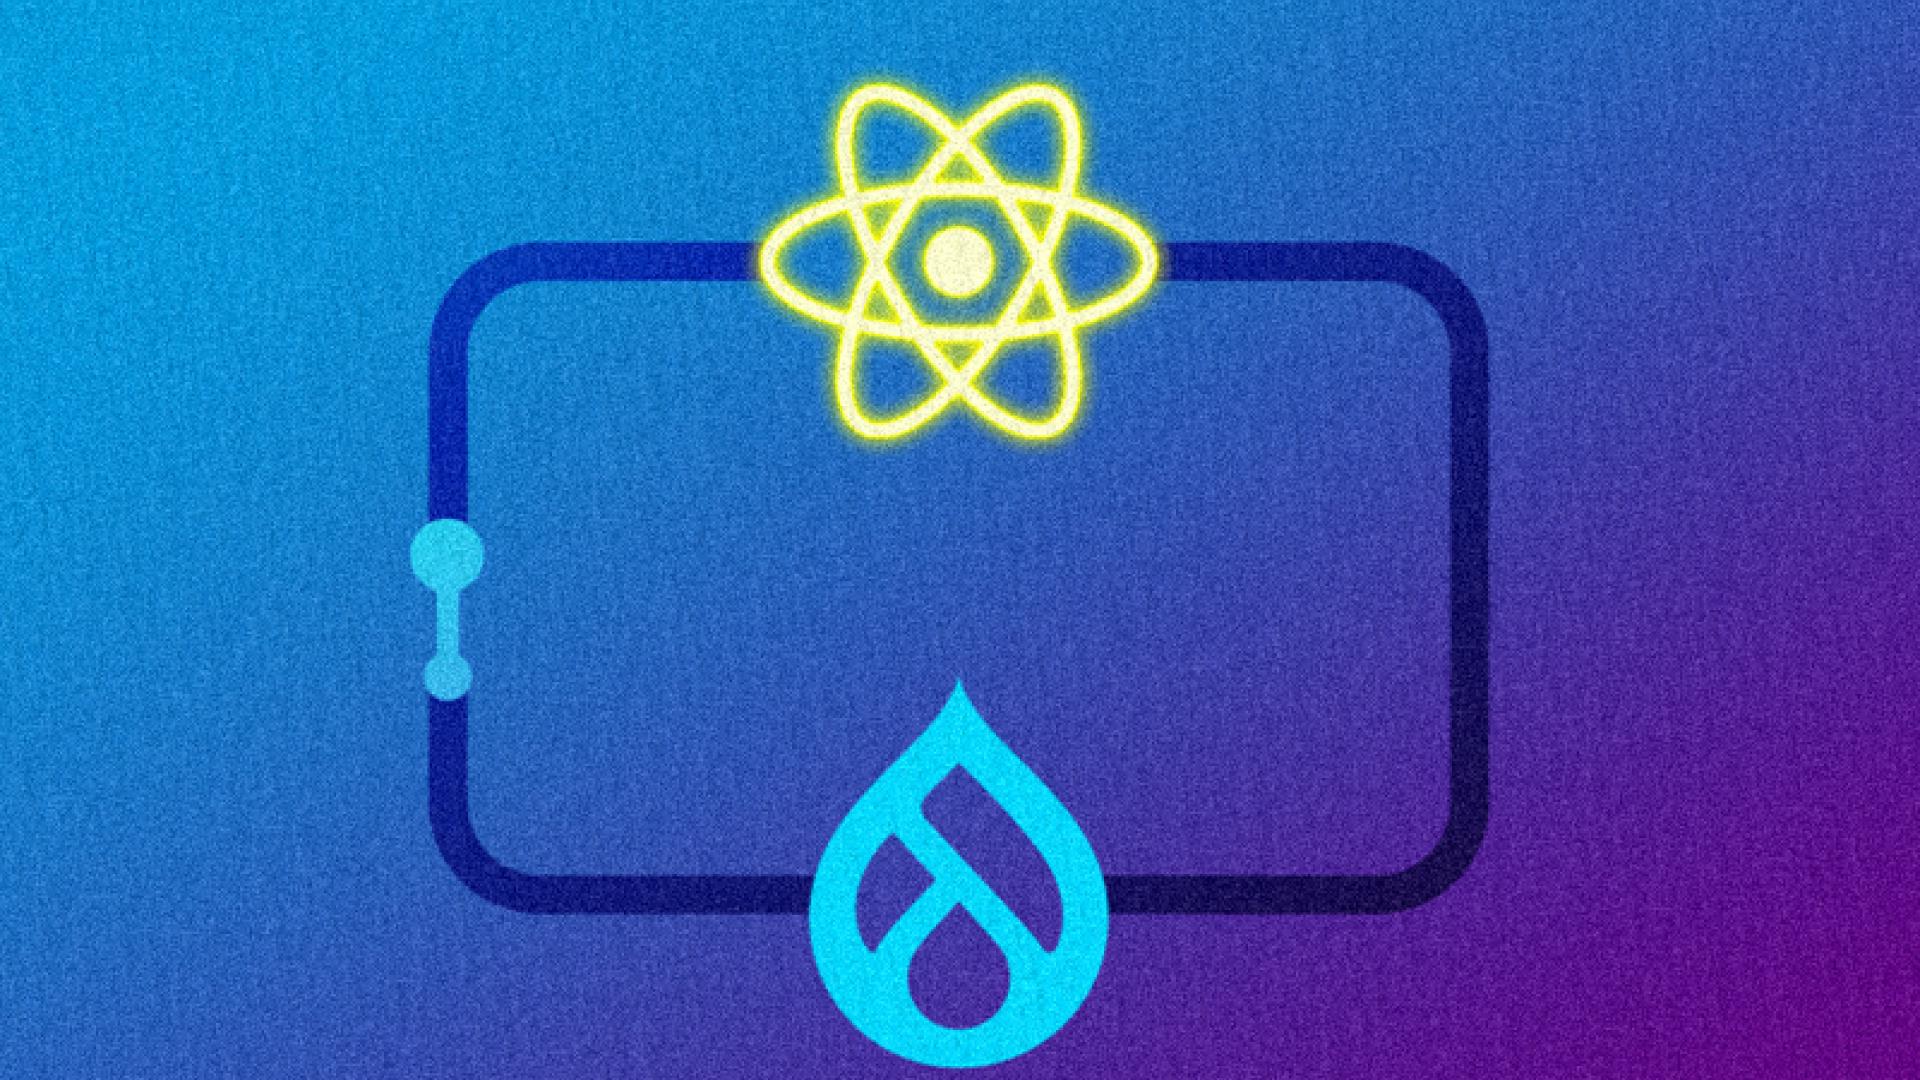 THE DYNAMIC DUO: EXPLORING DECOUPLED DRUPAL + REACT CONNECTION